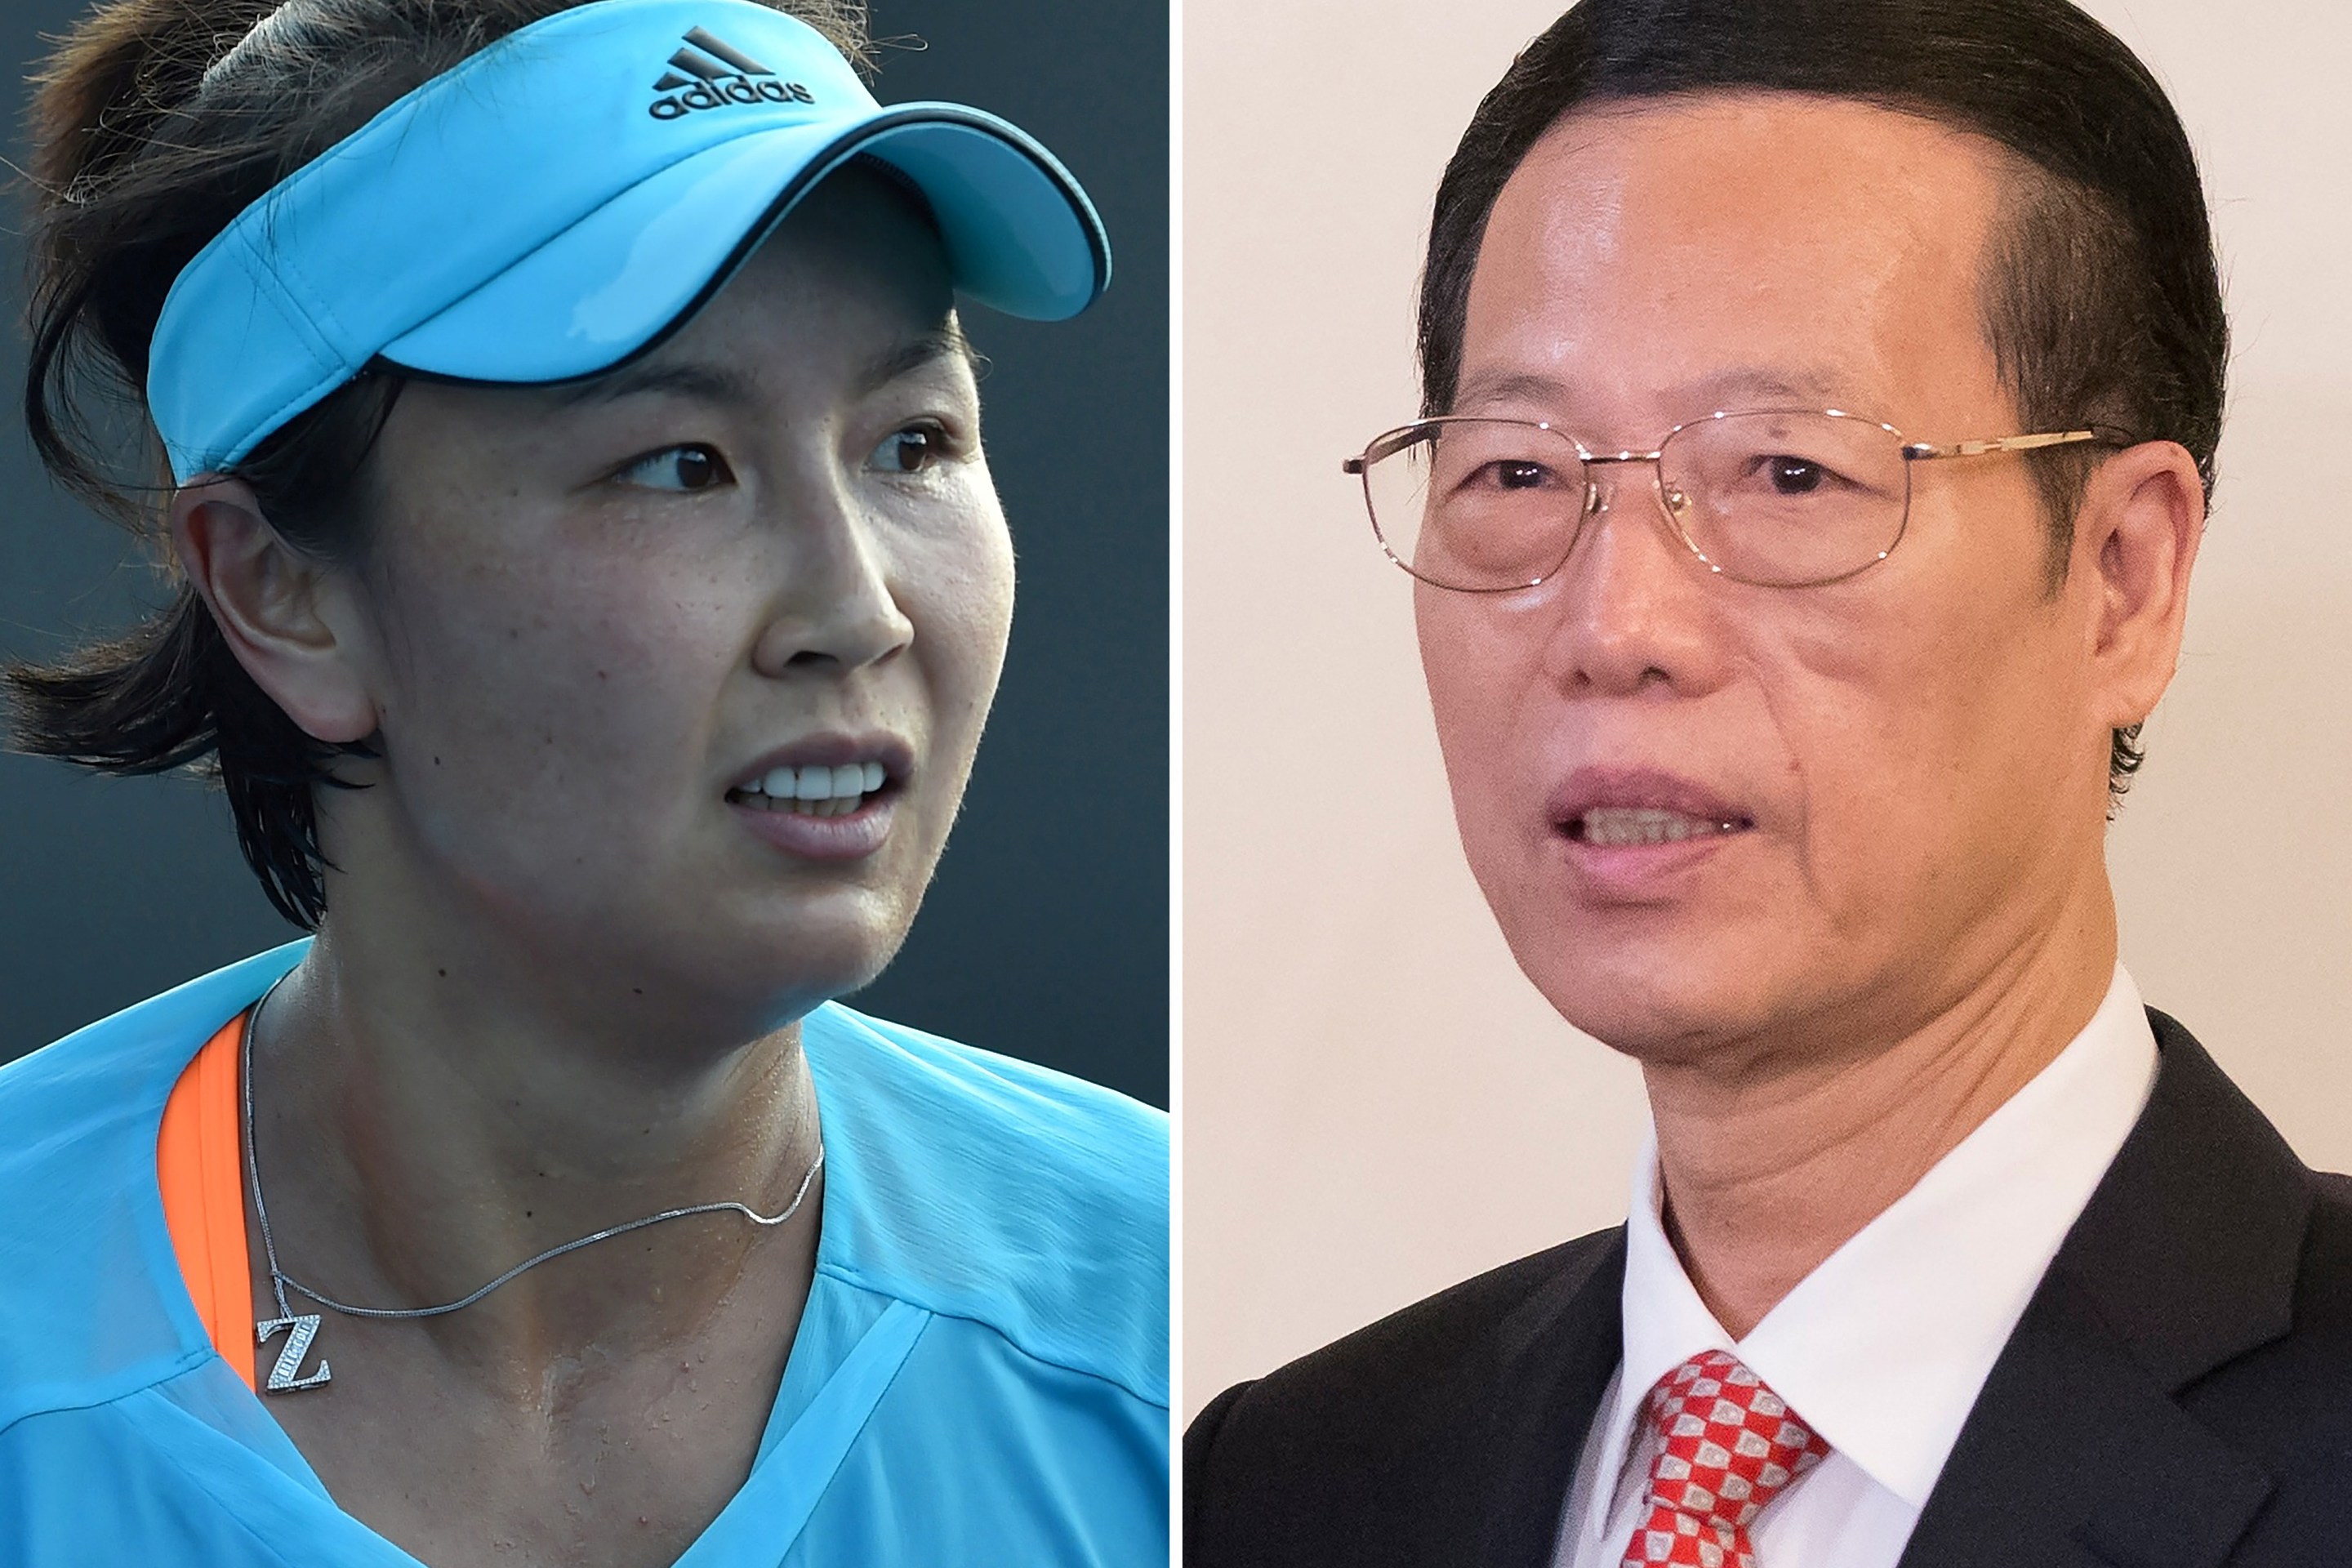 This combination of file photos shows tennis player Peng Shuai of China (L) during her women's singles first round match at the Australian Open tennis tournament in Melbourne on January 16, 2017; and Chinese Vice Premier Zhang Gaoli (R) during a visit to Russia at the Saint Petersburg International Investment Forum in Saint Petersburg on June 18, 2015. - Chinese tennis star Peng Shuai said she was safe and well during a video call with the International Olympic Committee chief on November 21, 2021, the organisation said, amid international concern about her well-being after being seen attending a Beijing tennis tournament, marking her first public appearance since she made her accusations against former vice premier Zhang Gaoli. (Photo by Paul CROCK and Alexander ZEMLIANICHENKO / AFP) (